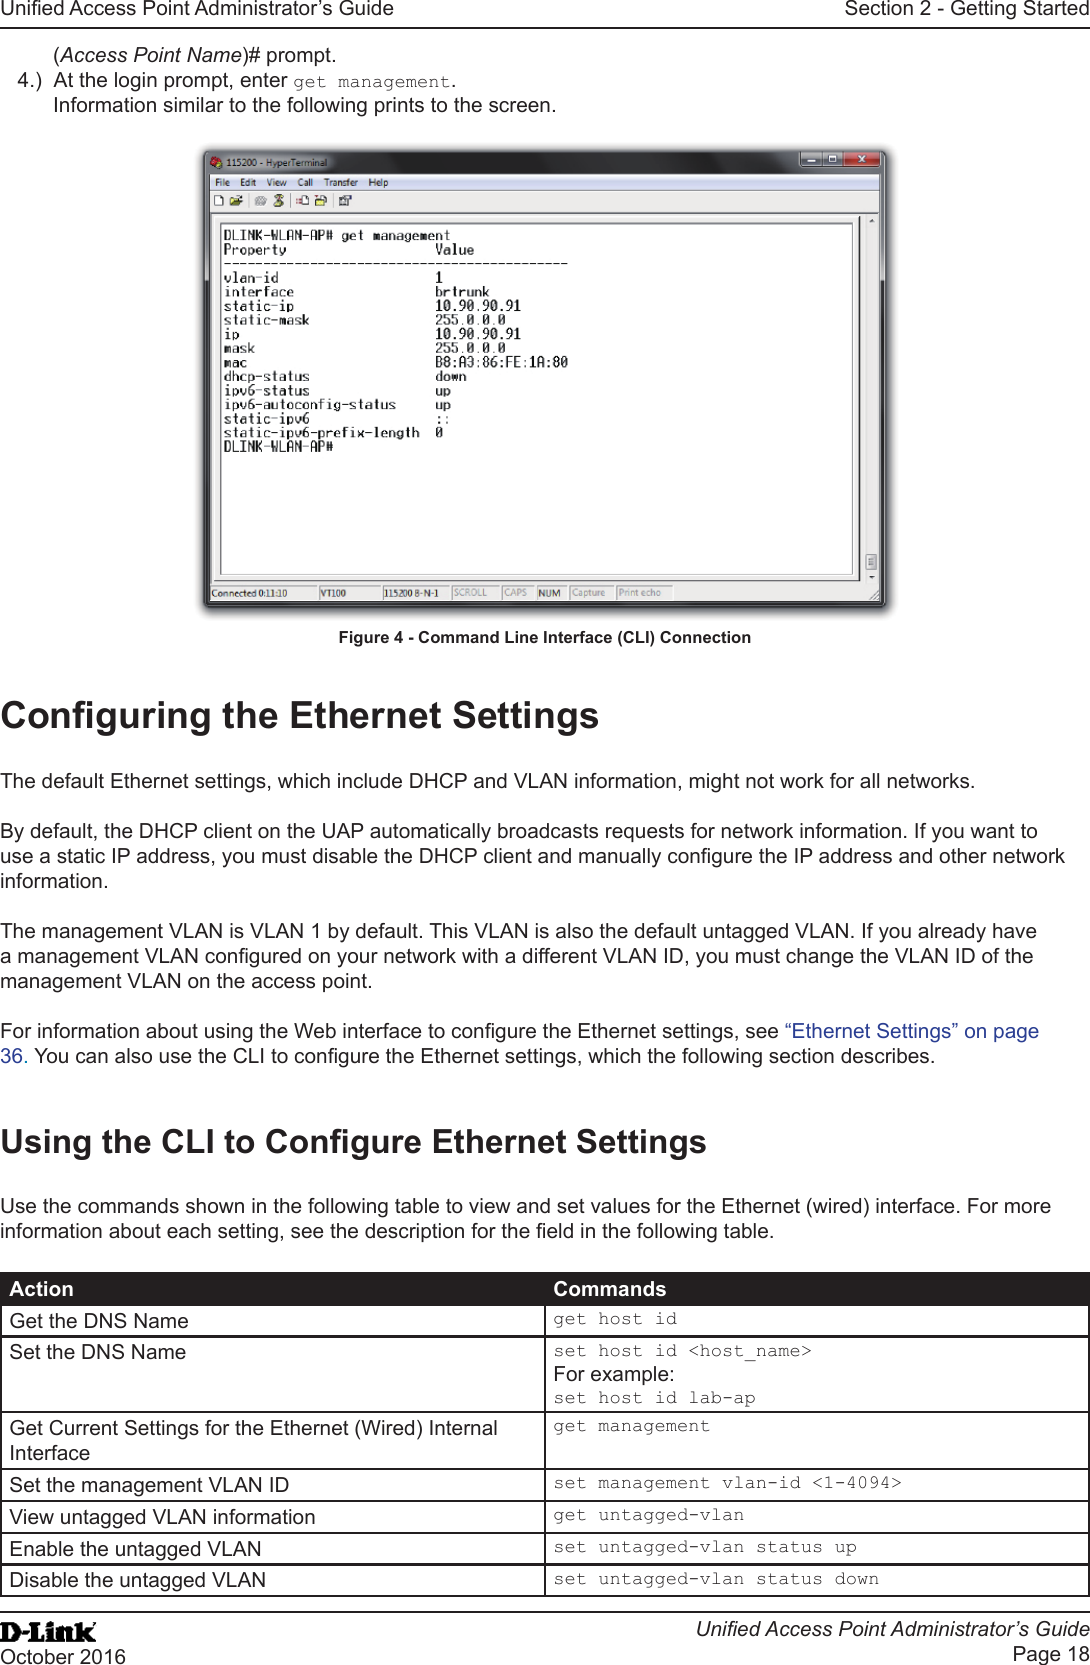 Unied Access Point Administrator’s GuideUnied Access Point Administrator’s GuidePage 18October 2016Section 2 - Getting Started(Access Point Name)# prompt. 4.)  At the login prompt, enter get management.Information similar to the following prints to the screen.Figure 4 - Command Line Interface (CLI) ConnectionConguring the Ethernet SettingsThe default Ethernet settings, which include DHCP and VLAN information, might not work for all networks. By default, the DHCP client on the UAP automatically broadcasts requests for network information. If you want to use a static IP address, you must disable the DHCP client and manually congure the IP address and other network information.The management VLAN is VLAN 1 by default. This VLAN is also the default untagged VLAN. If you already have a management VLAN congured on your network with a different VLAN ID, you must change the VLAN ID of the management VLAN on the access point. For information about using the Web interface to congure the Ethernet settings, see “Ethernet Settings” on page 36. You can also use the CLI to congure the Ethernet settings, which the following section describes.Using the CLI to Congure Ethernet SettingsUse the commands shown in the following table to view and set values for the Ethernet (wired) interface. For more information about each setting, see the description for the eld in the following table.Action CommandsGet the DNS Name get host idSet the DNS Name set host id &lt;host_name&gt;For example:set host id lab-apGet Current Settings for the Ethernet (Wired) Internal Interfaceget managementSet the management VLAN ID set management vlan-id &lt;1-4094&gt;View untagged VLAN information get untagged-vlanEnable the untagged VLAN set untagged-vlan status upDisable the untagged VLAN set untagged-vlan status down